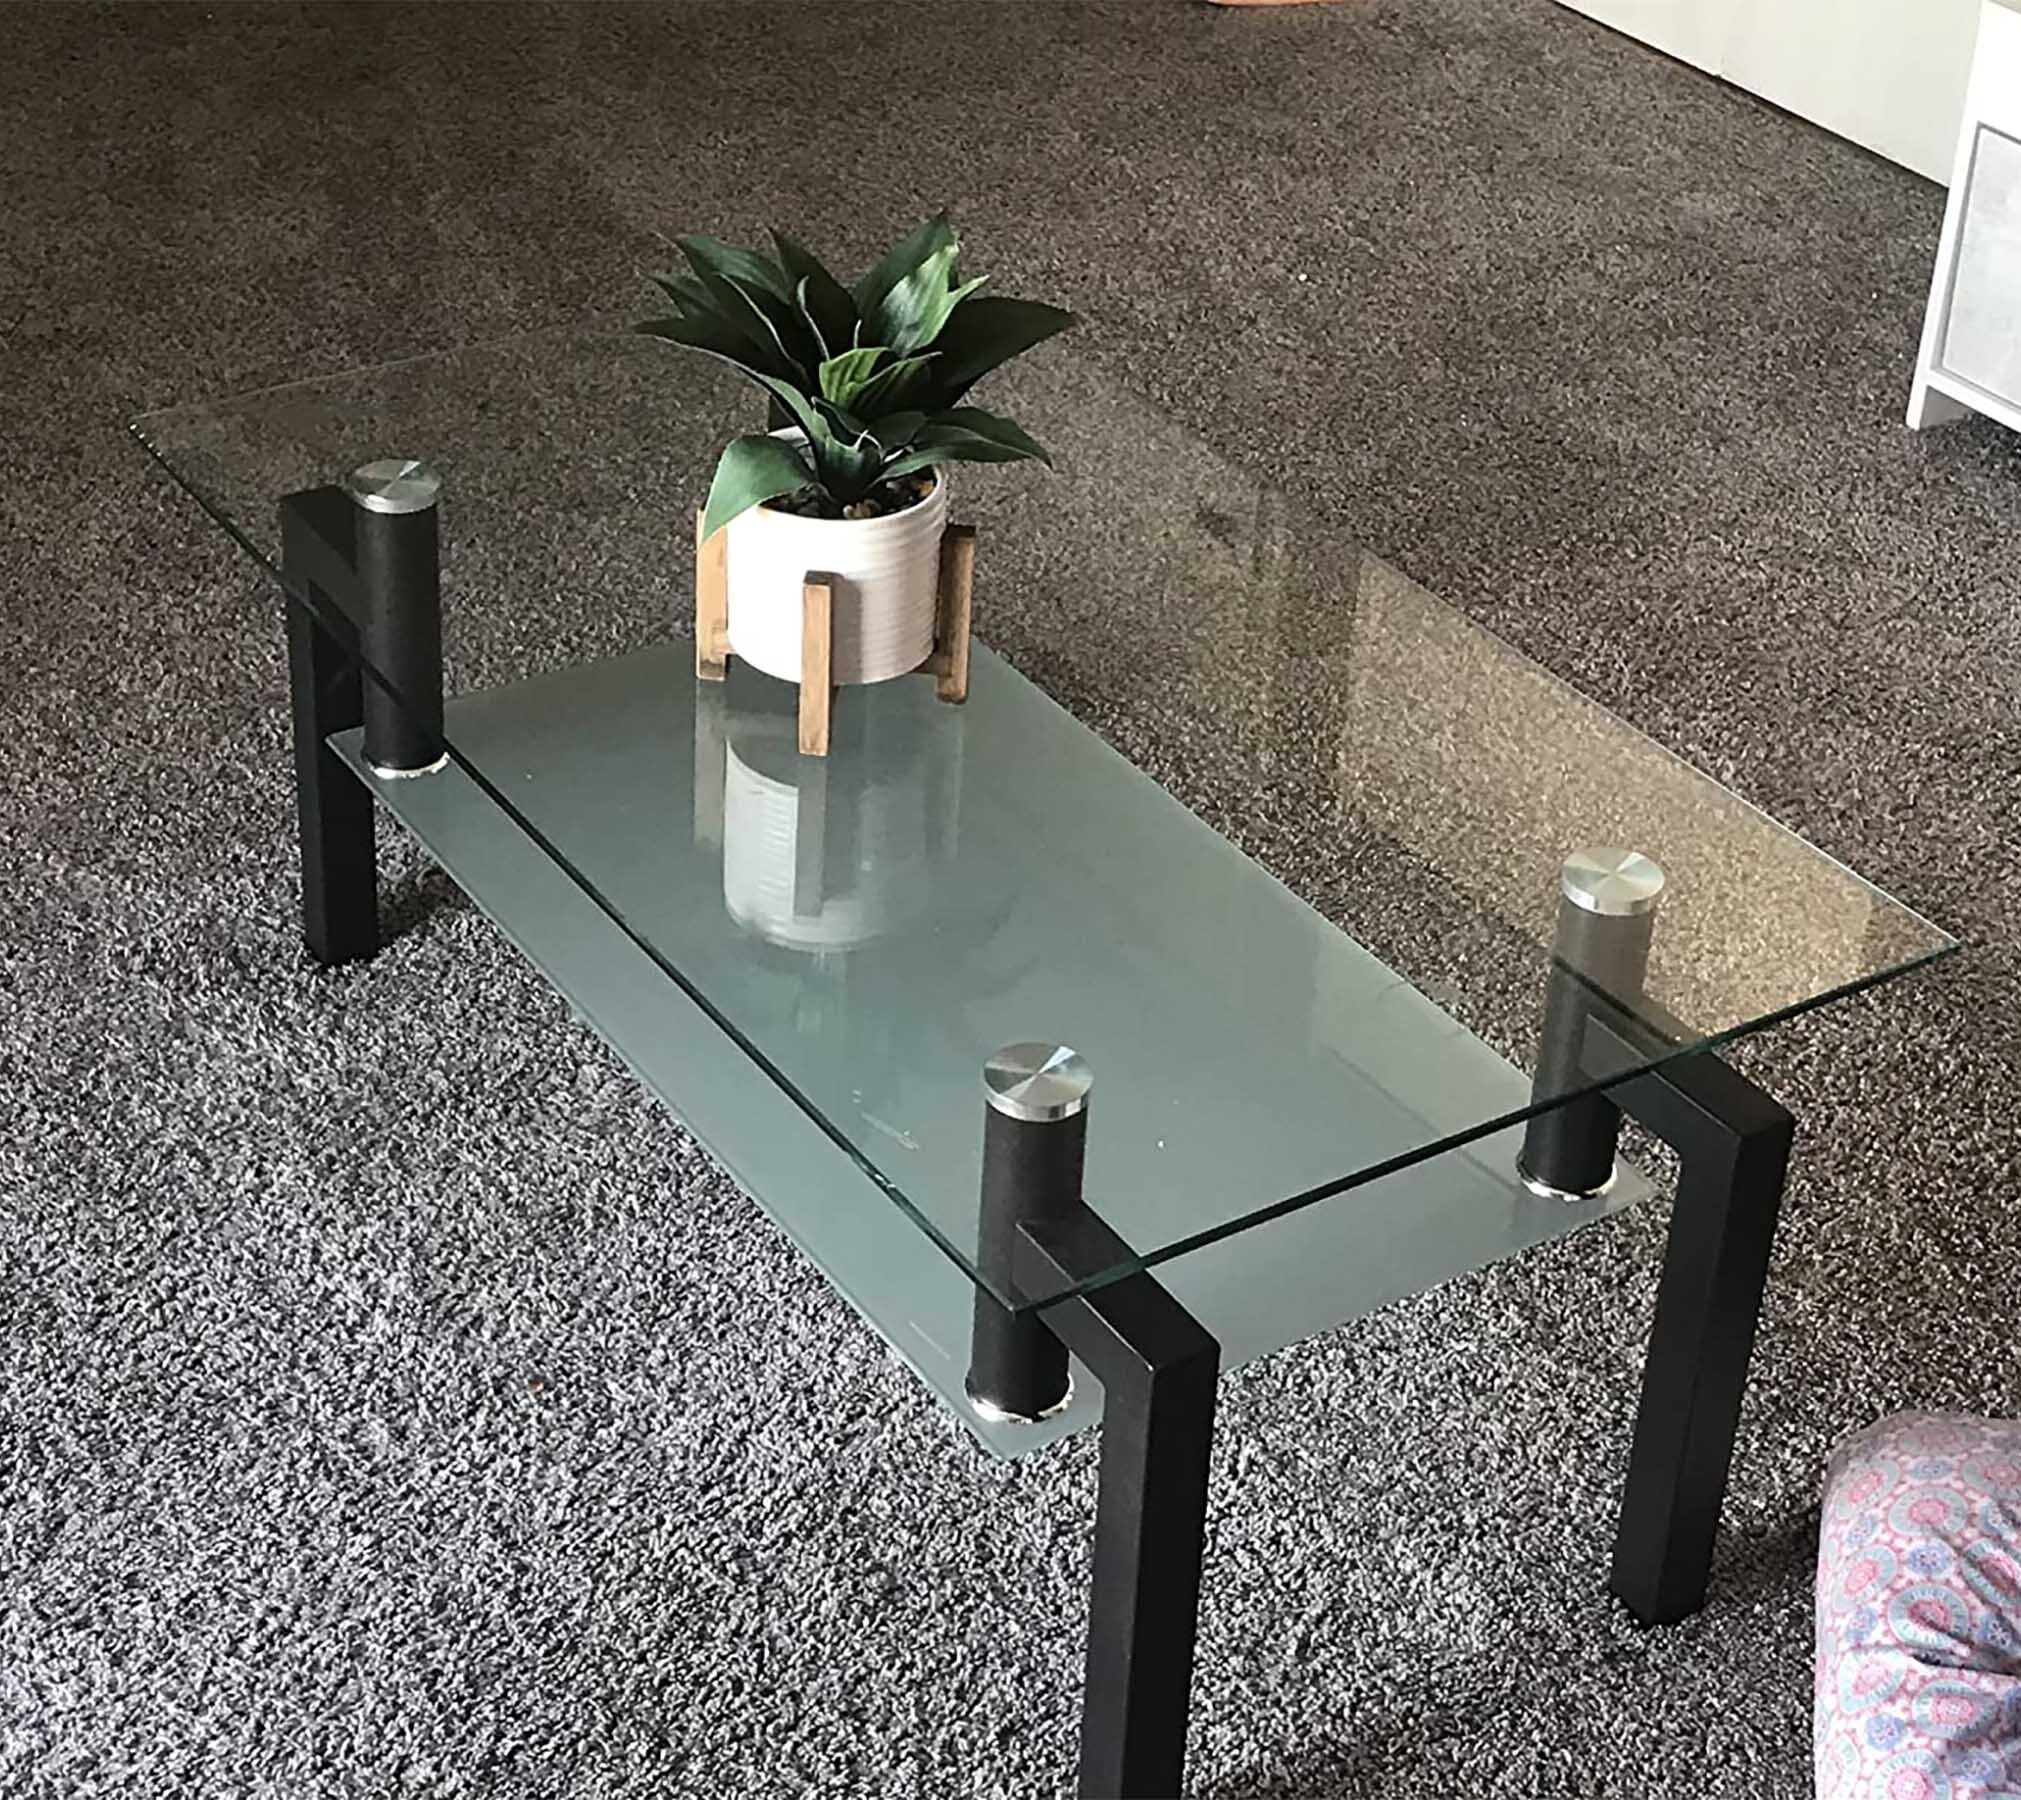 Orren Ellis Modern Glass Coffee Table With Storage,2 Tier Center Clear Coffee  Tables With Tempered Glass Tabletop & Metal Legs For Living Room | Wayfair Within Glass Tabletop Coffee Tables (View 5 of 20)